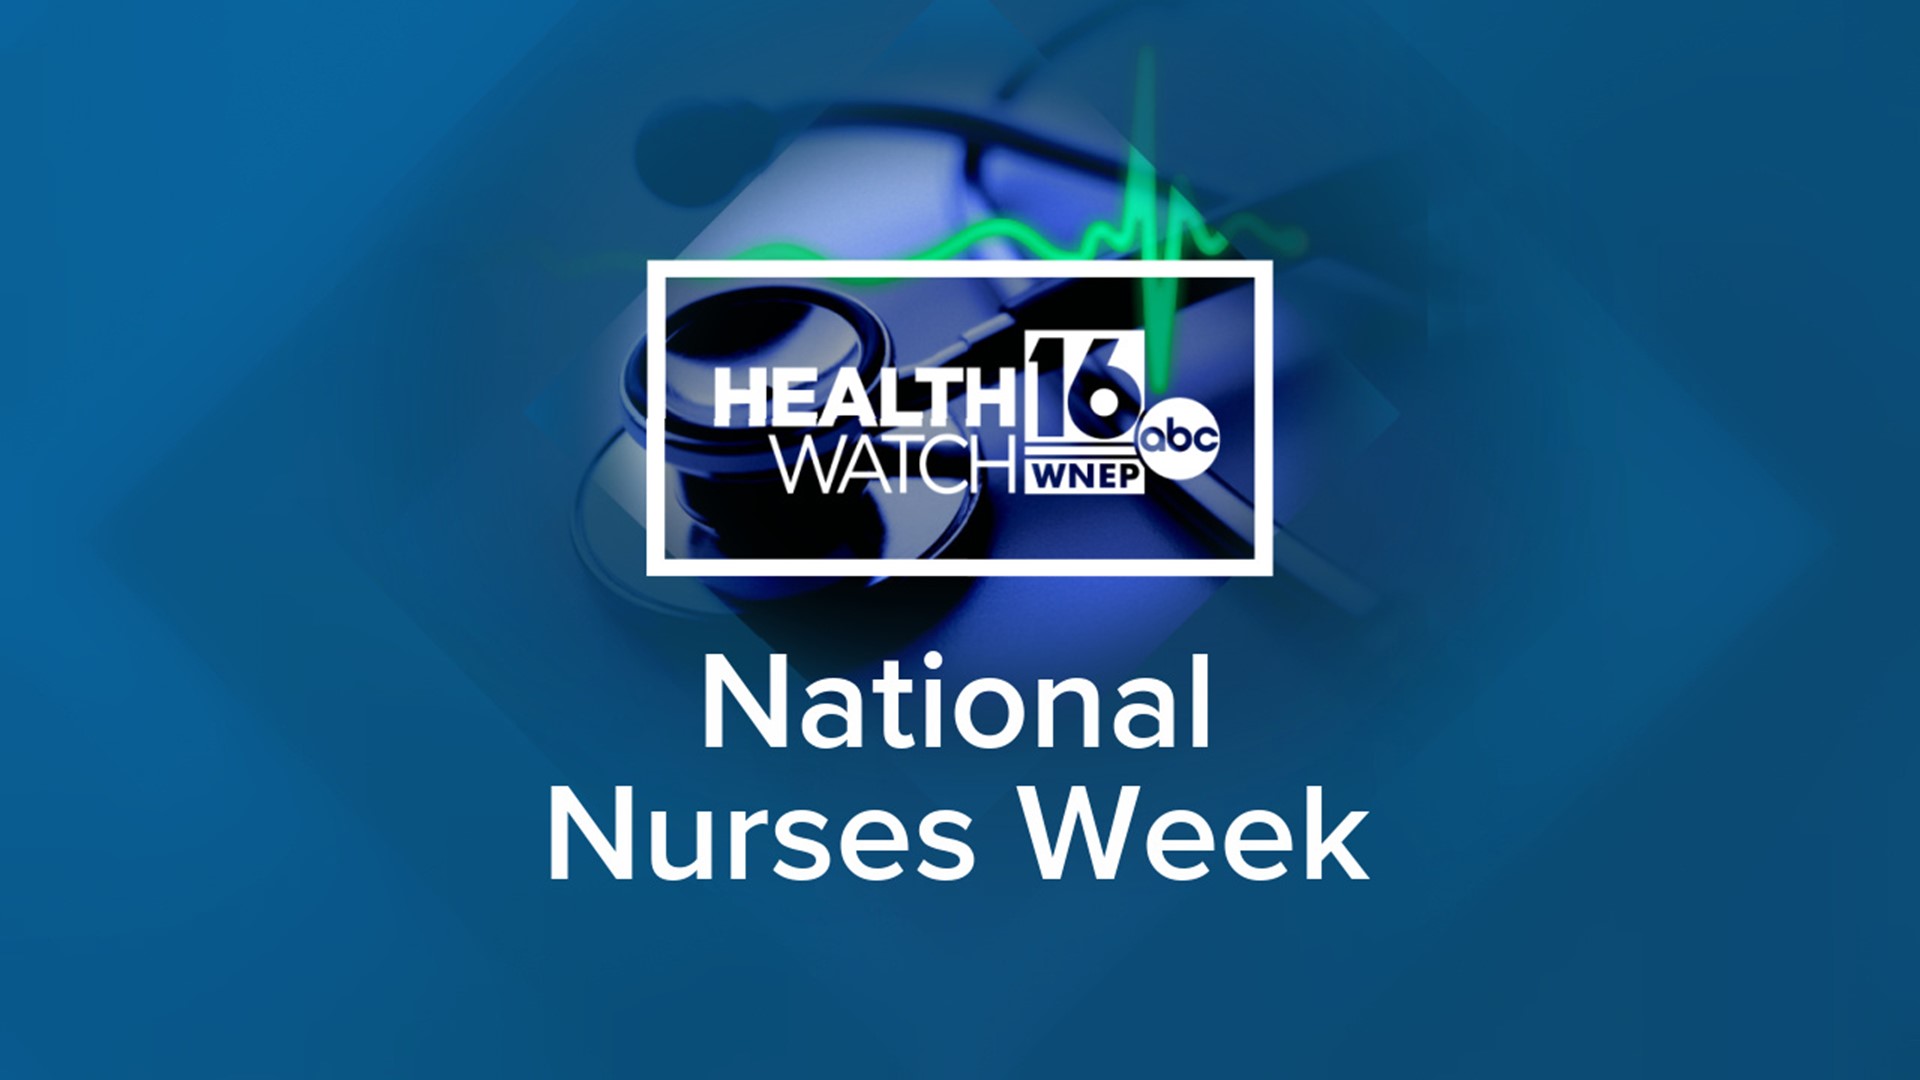 It was designated back in the 1990s, but National Nurses Week took on special meaning this year after the COVID-19 pandemic.